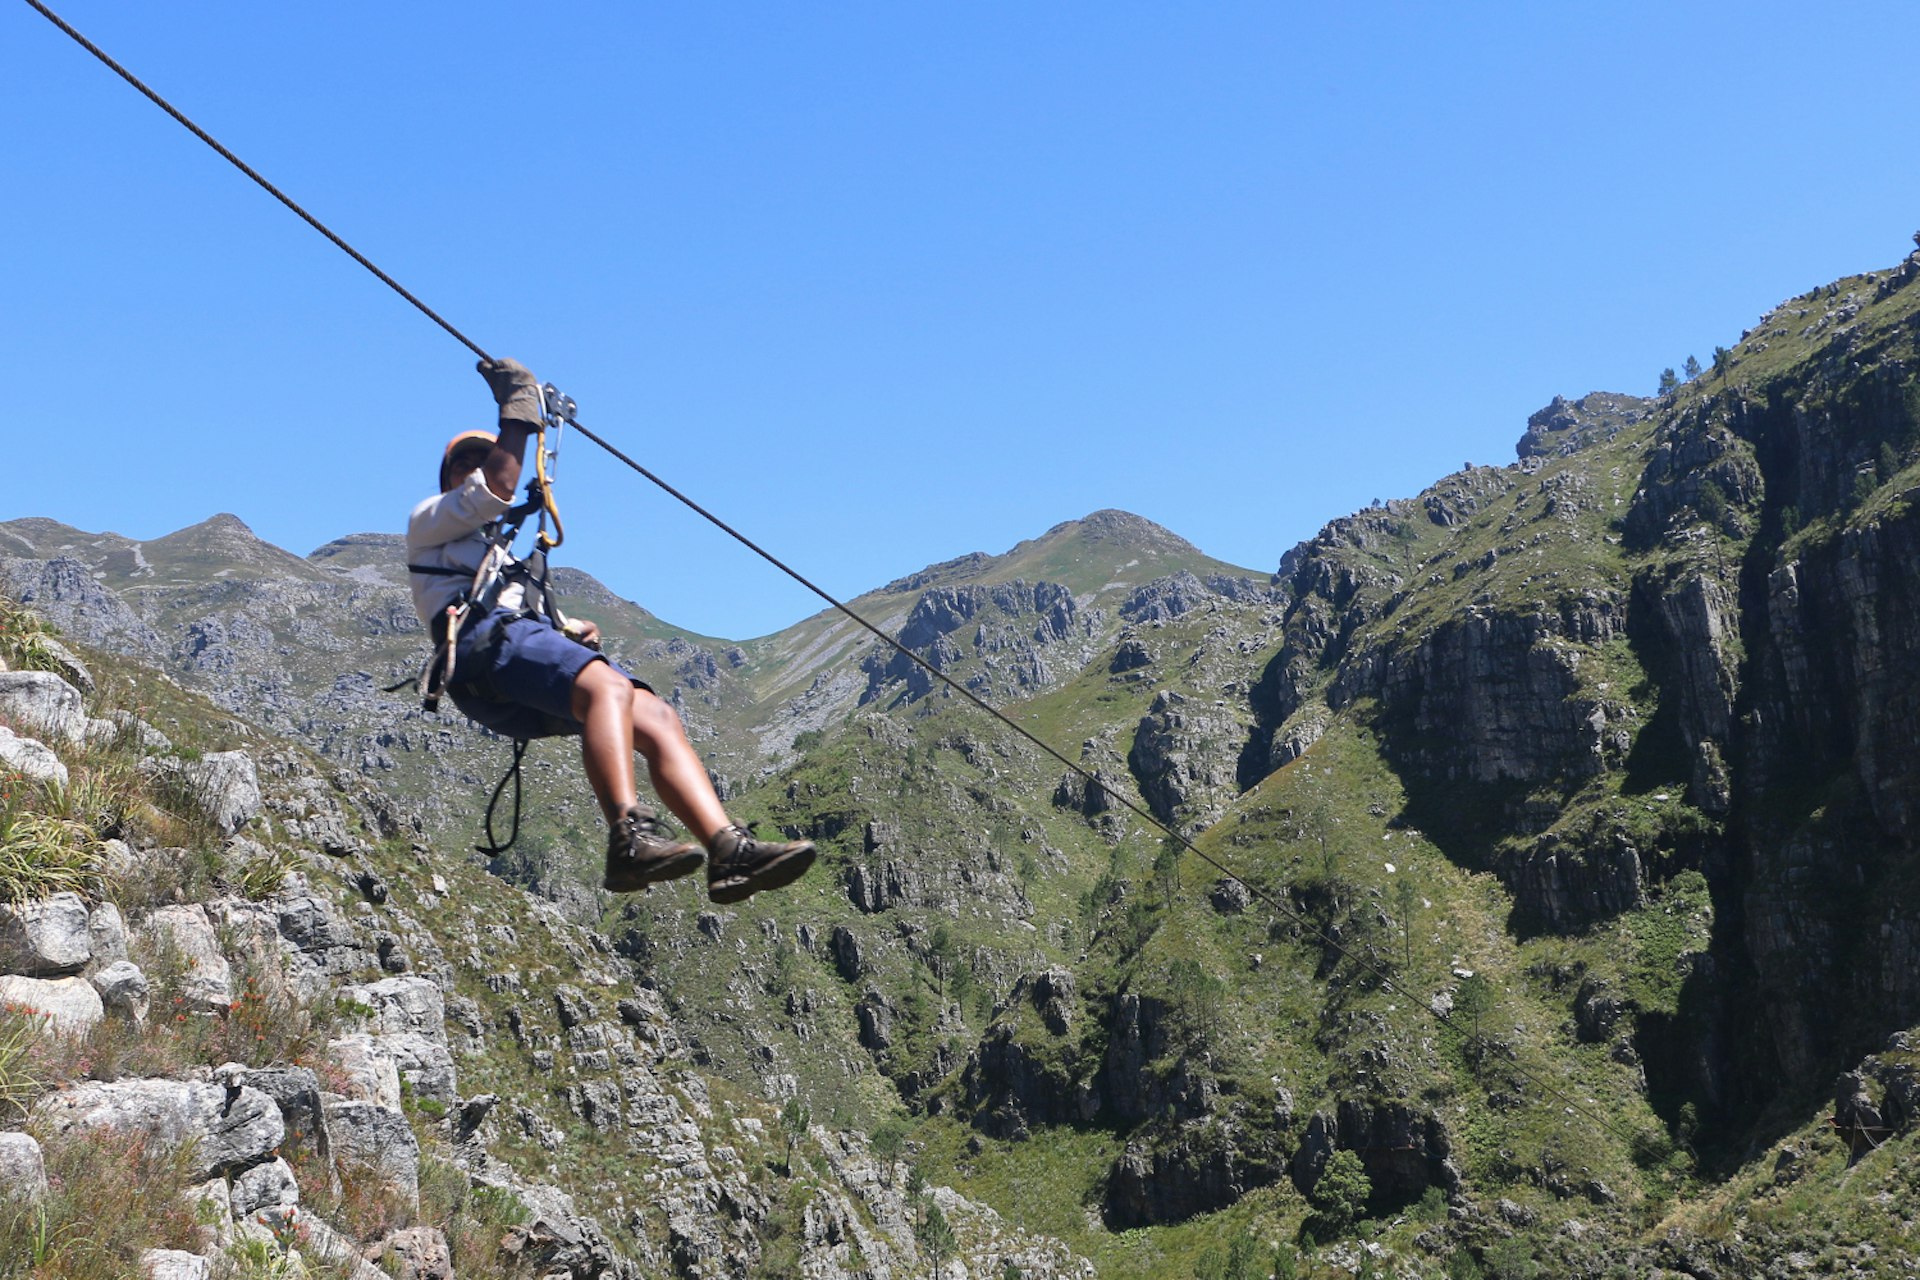 High-flying fun on one of the Cape Canopy Tour's ziplines. Image by Simon Richmond / Lonely Planet